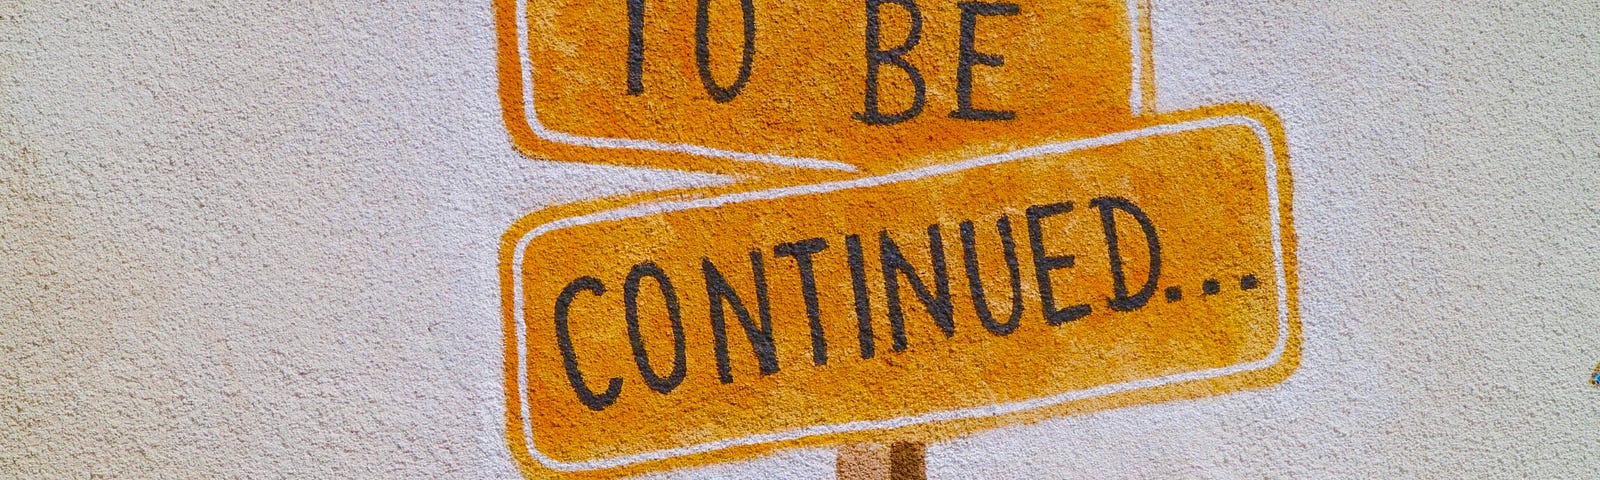 A sign reading “to be continued”